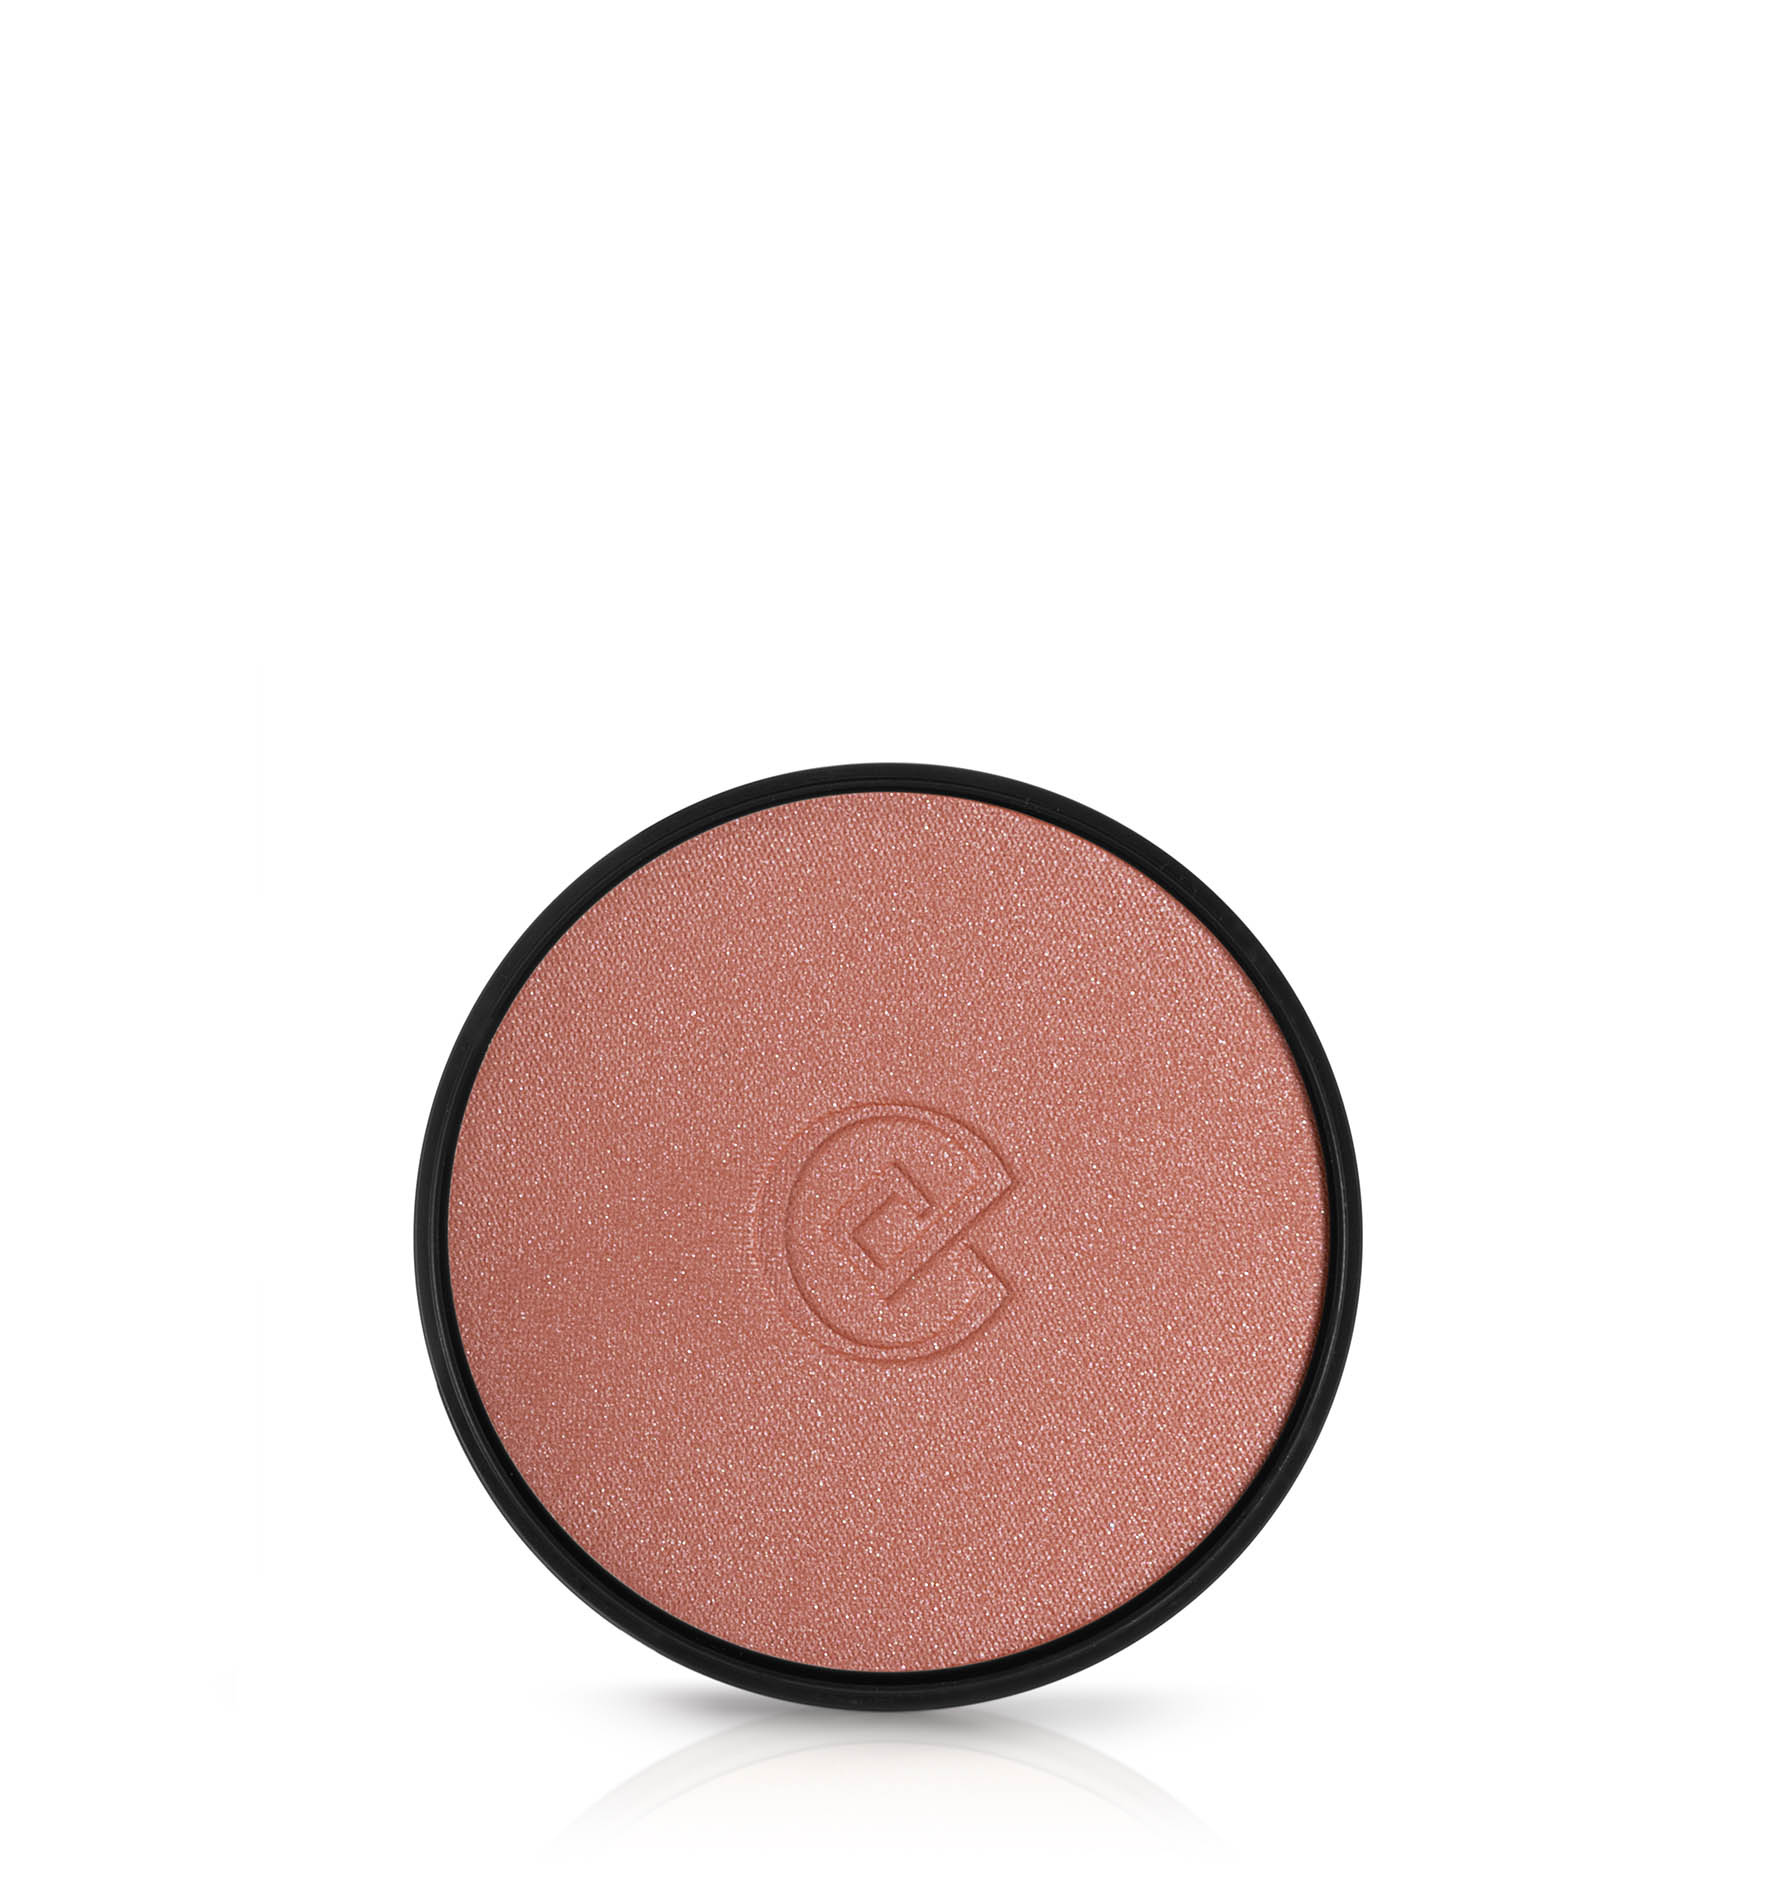 IMPECCABLE MAXI BLUSH REFILL - Bronzers and Blushes  | Collistar - Shop Online Ufficiale